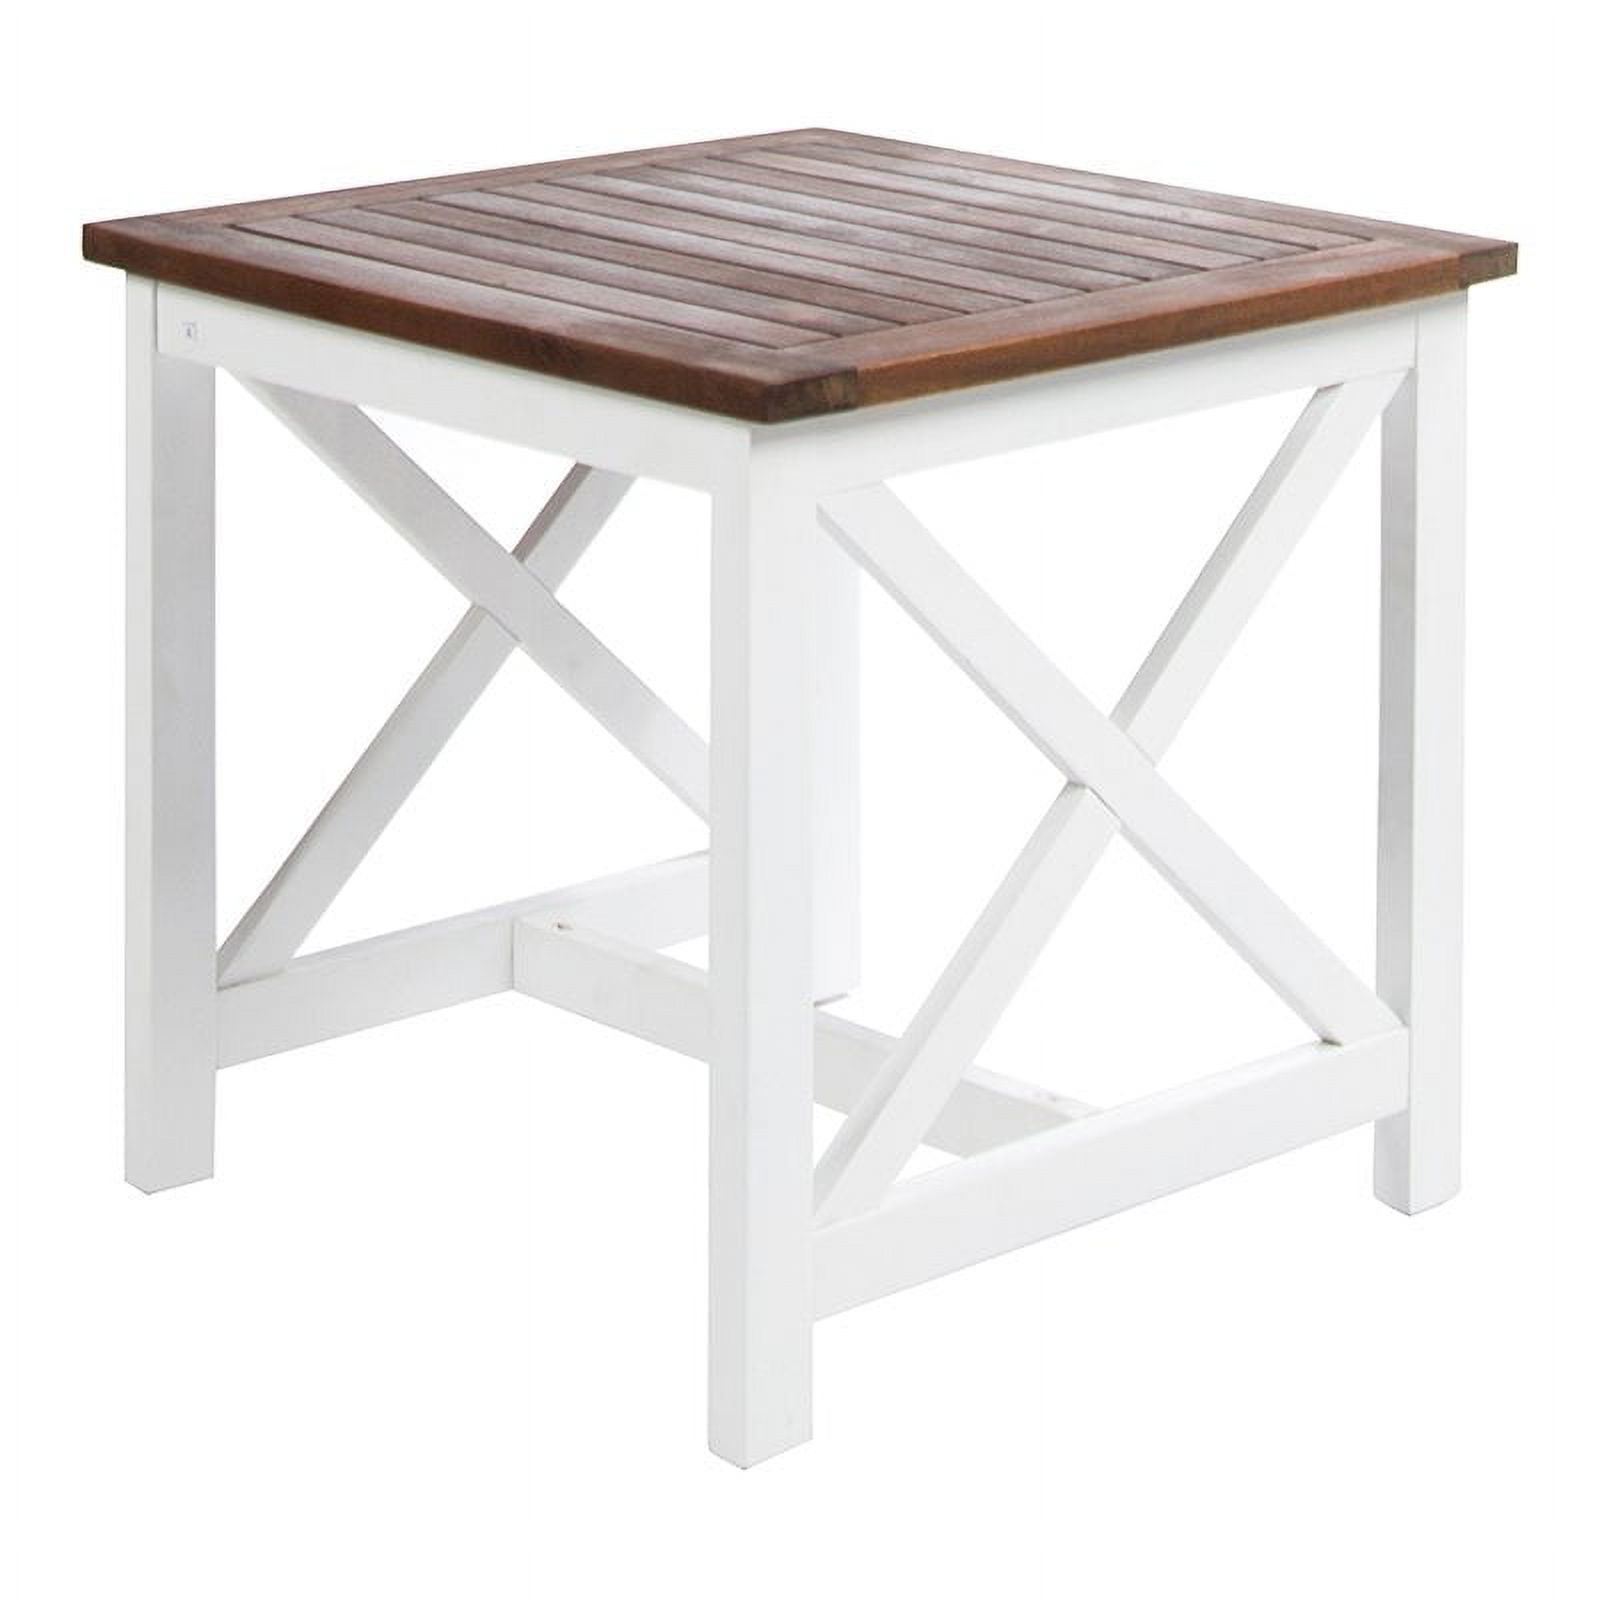 Noble House Cassara Acacia Wood Outdoor End Table with White Frame in Dark Oak - image 1 of 16